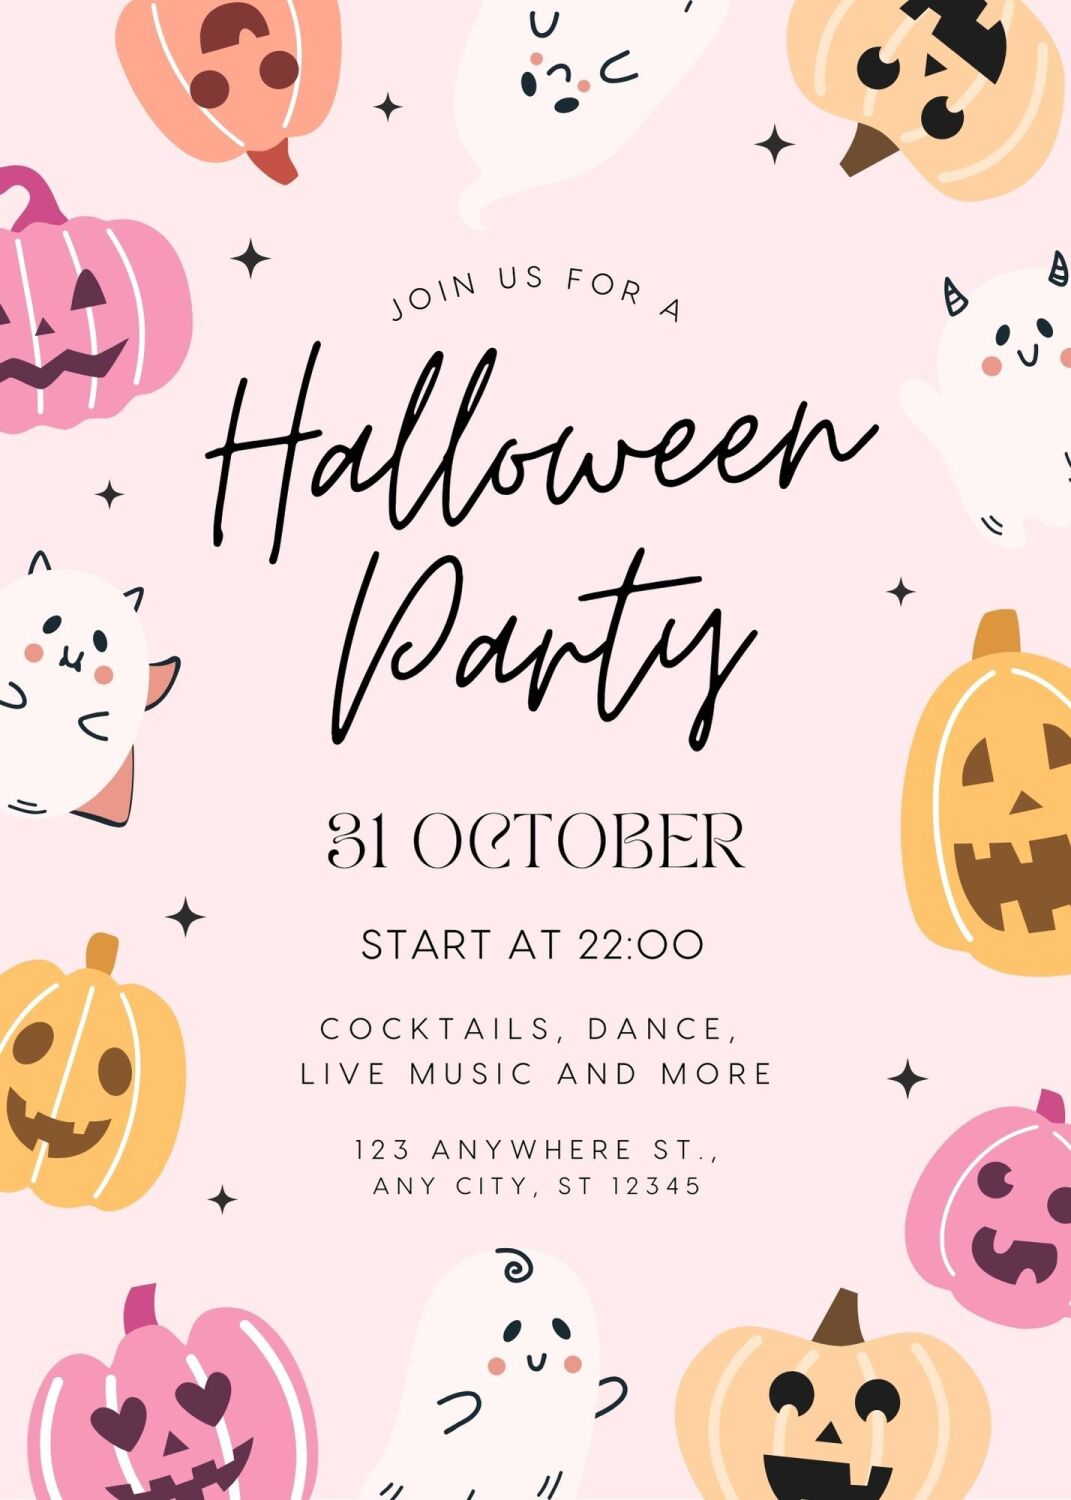 Personalised With Your Details - Customised Halloween Party Invitation PDF 